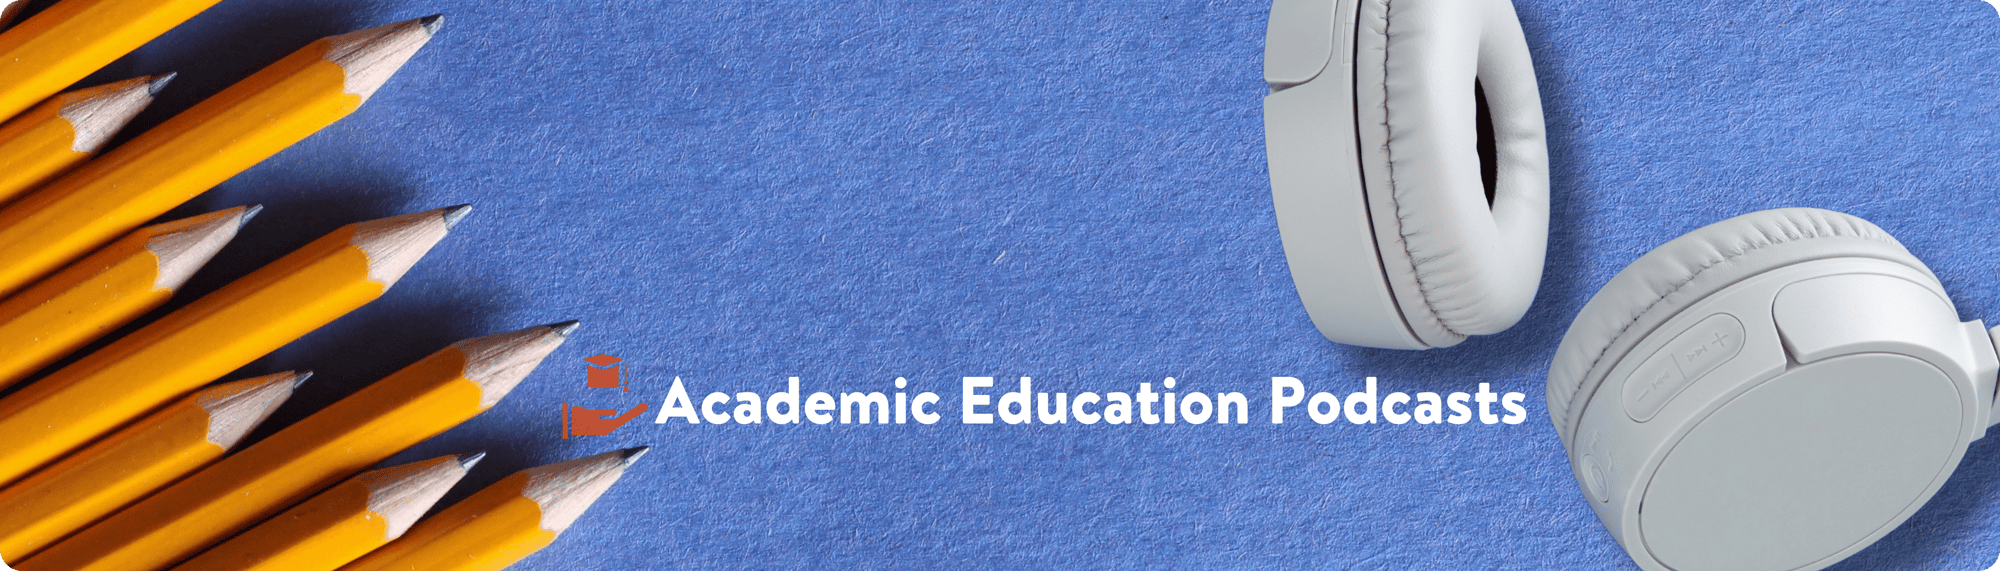 what are Academic Education podcasts?